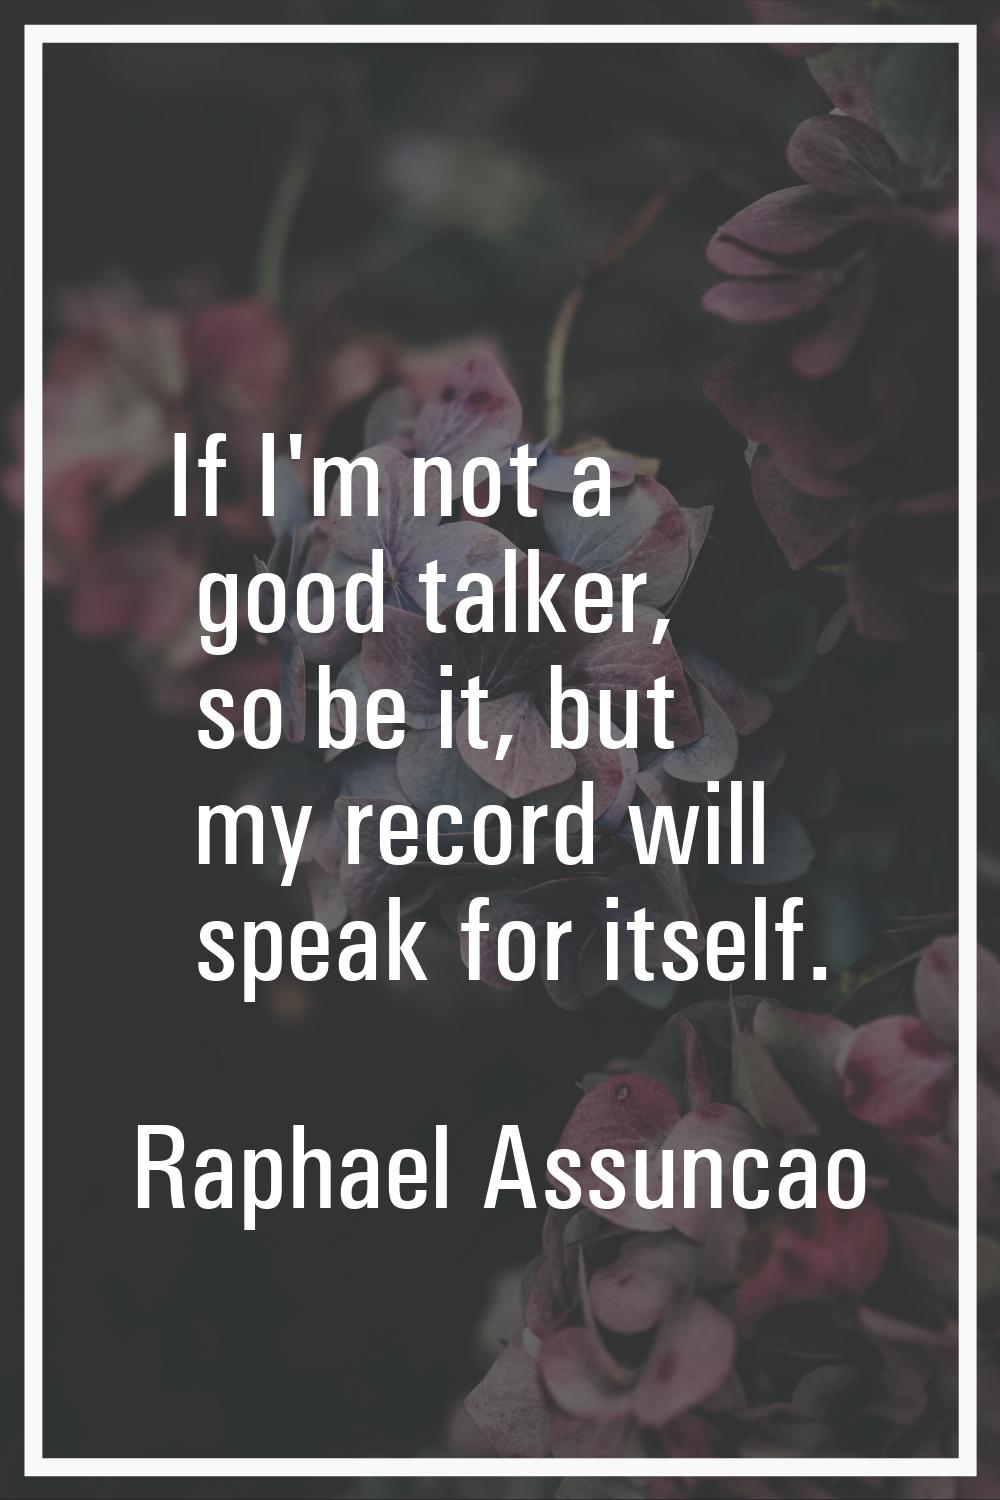 If I'm not a good talker, so be it, but my record will speak for itself.